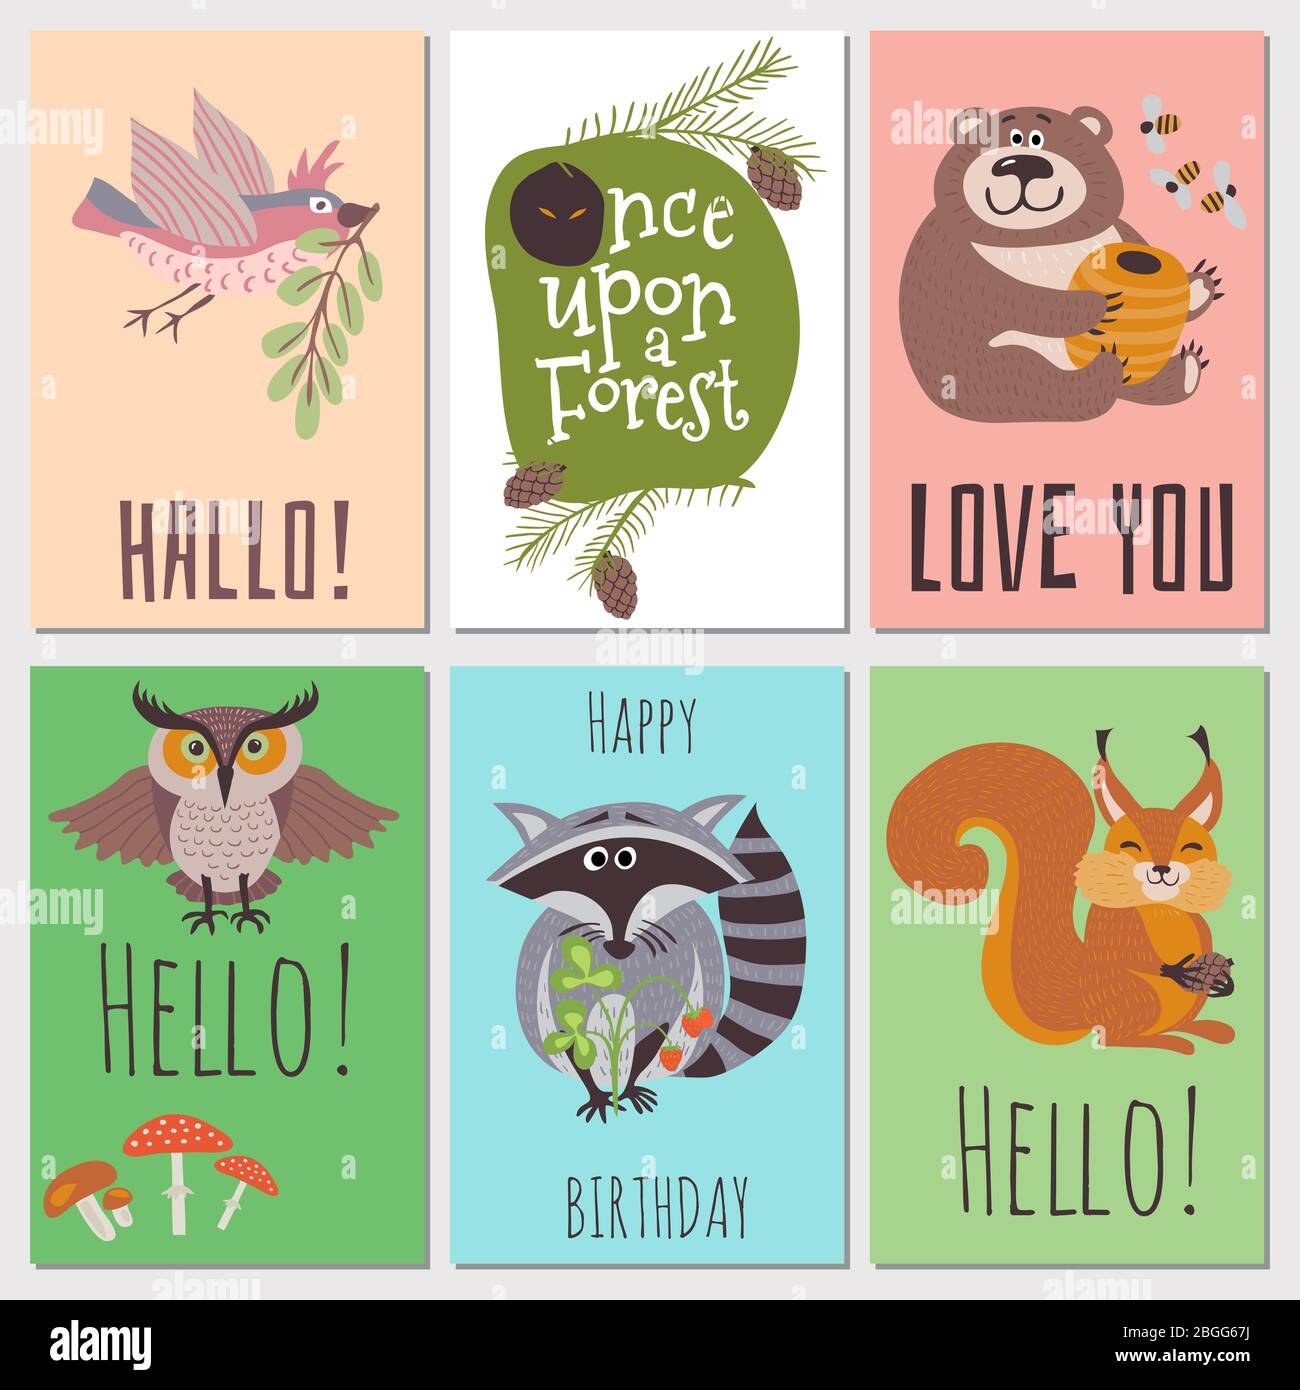 Once upon forest cards collection. Cute animals kids cards. Vector forest animal bear and owl on card illustration Stock Vector